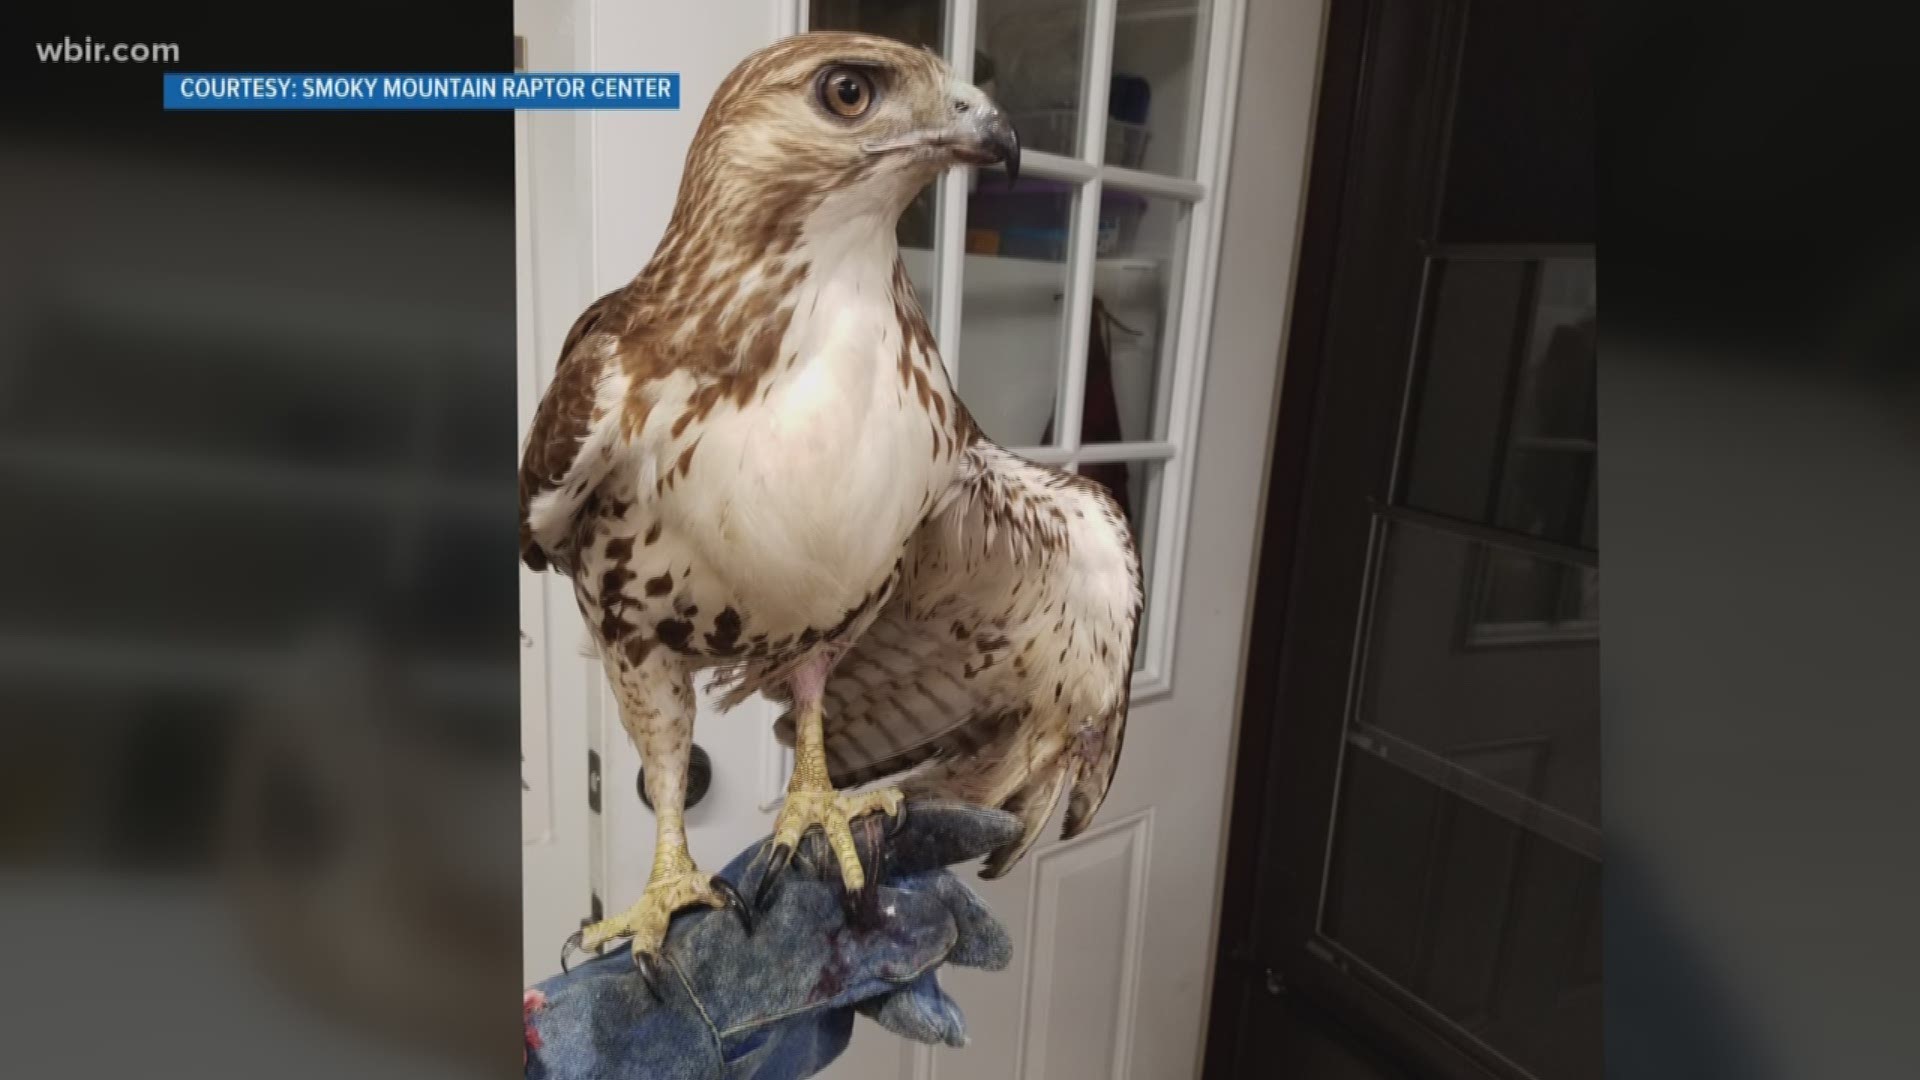 April 23, 2018: The Smoky Mountain Raptor Center has recently been swamped with birds needing a little help.